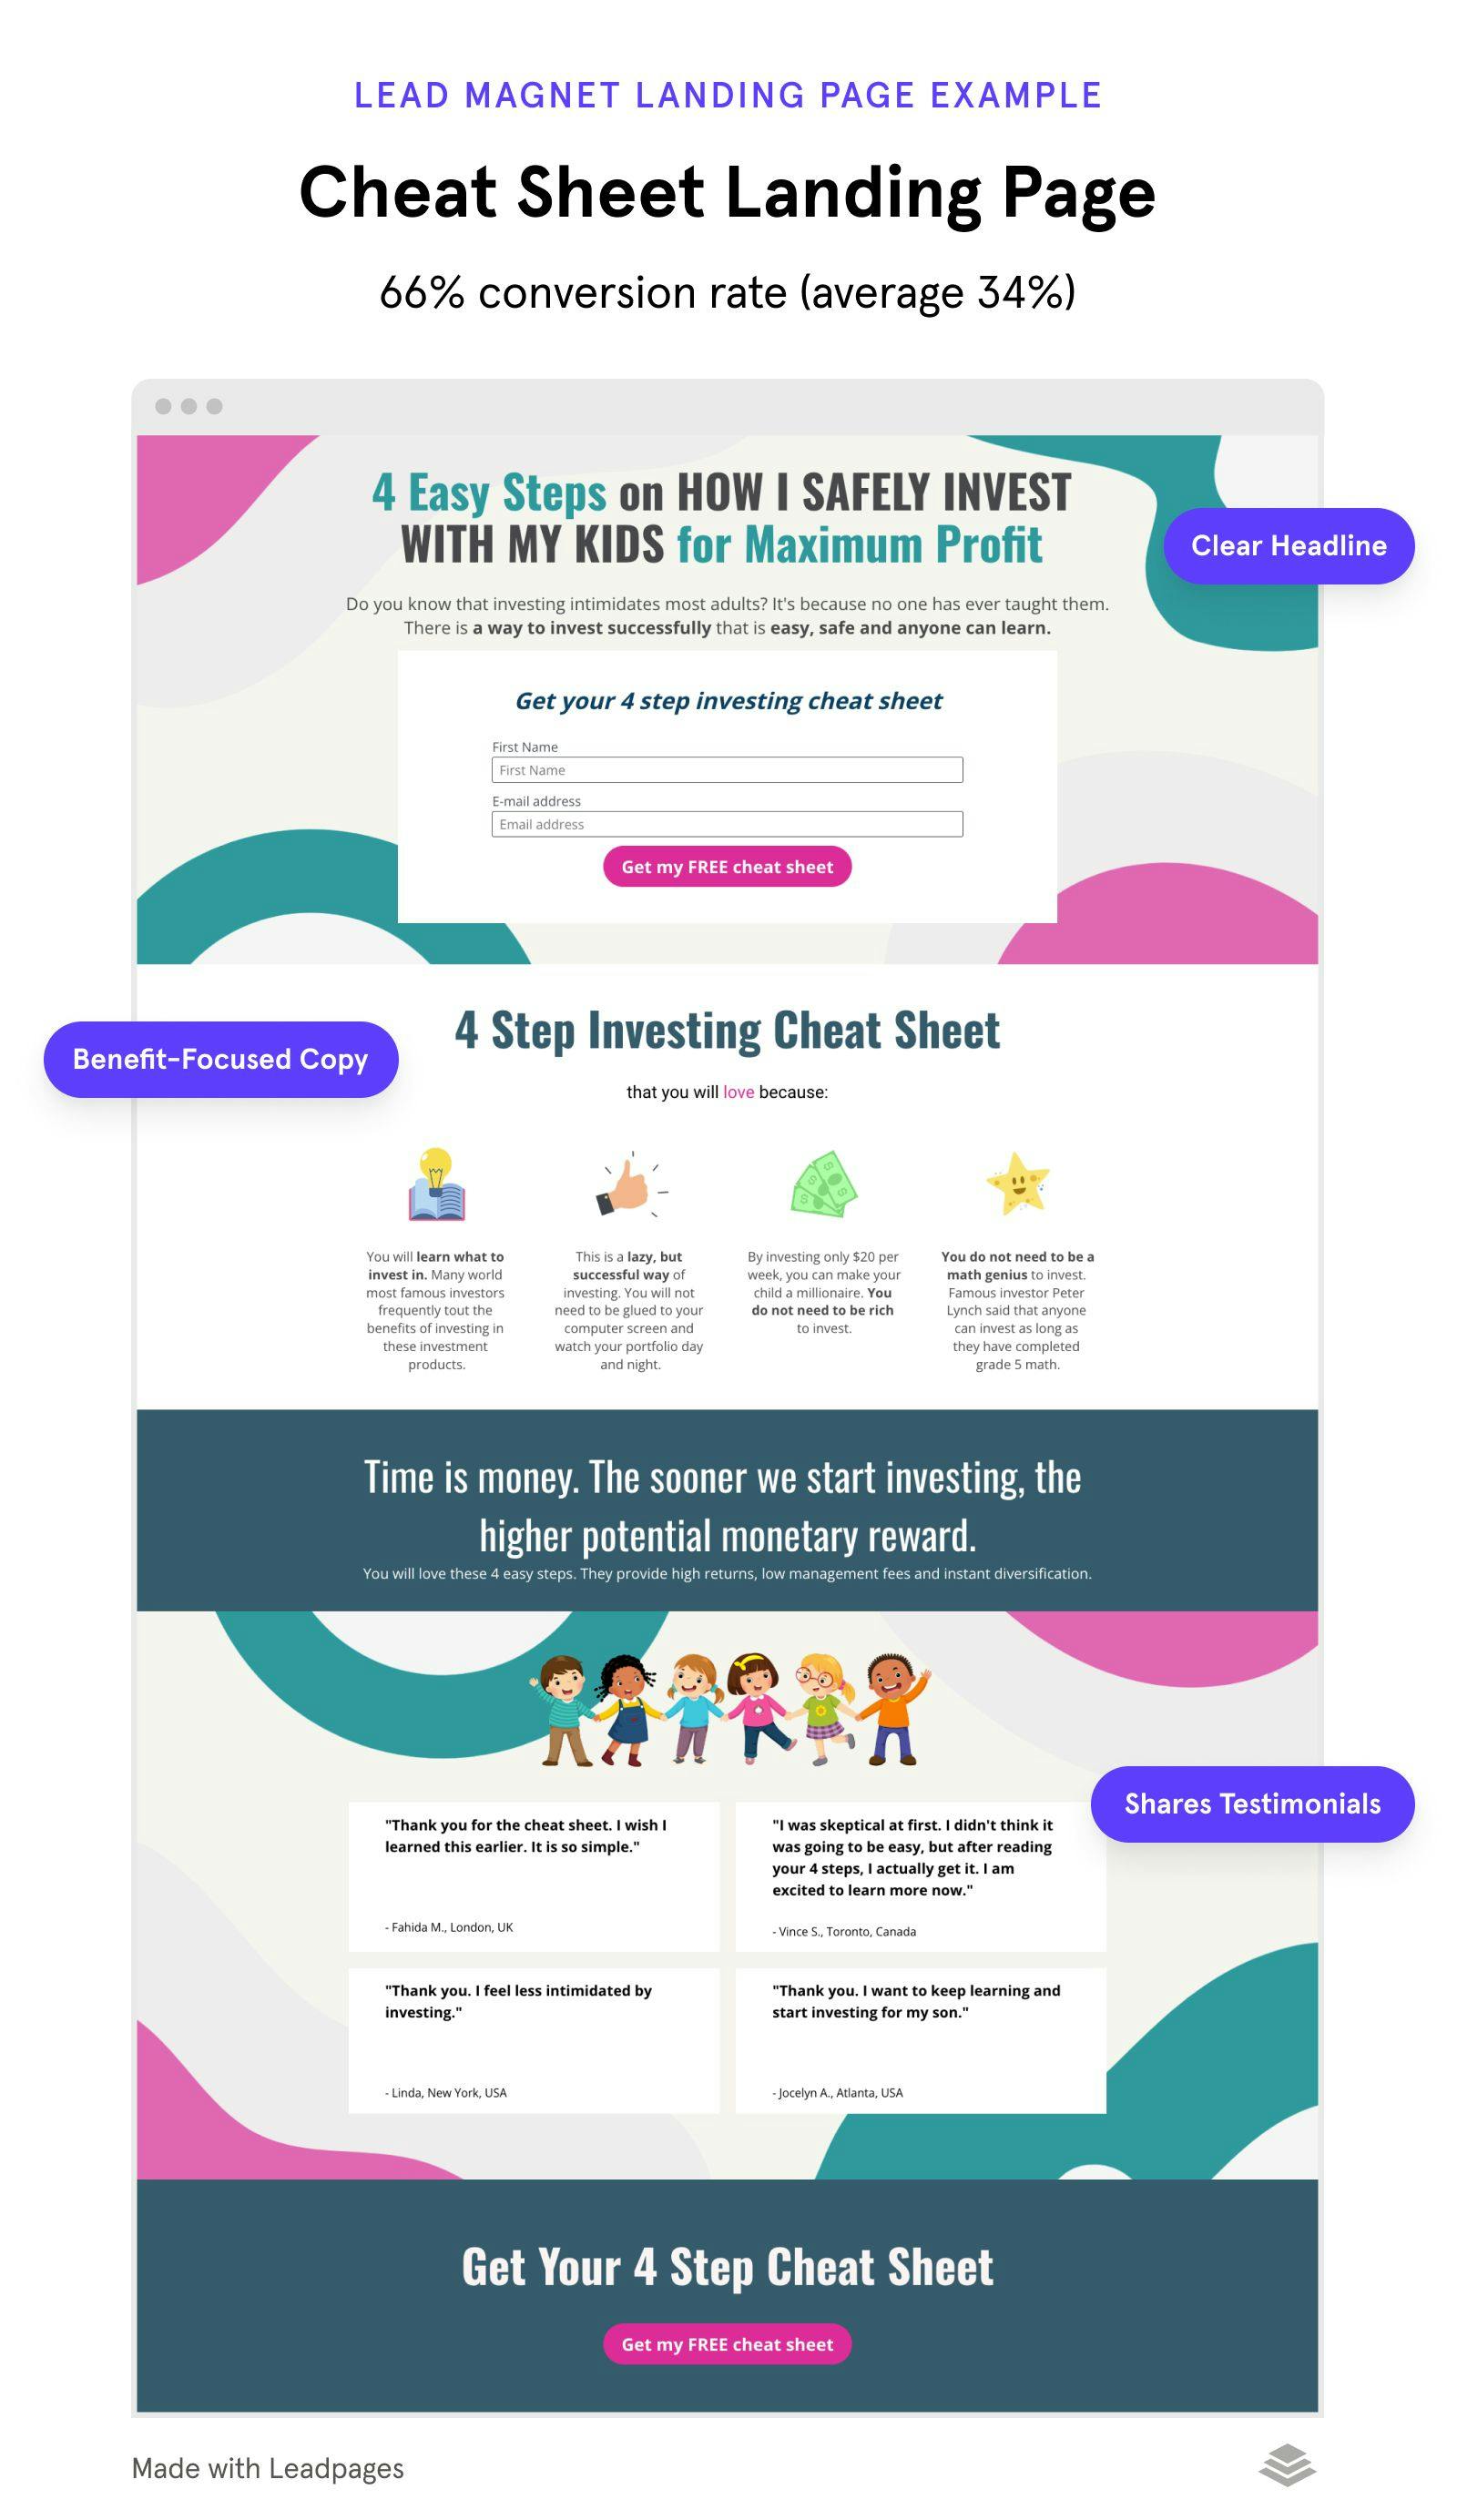 Cheat sheet lead magnet landing page example